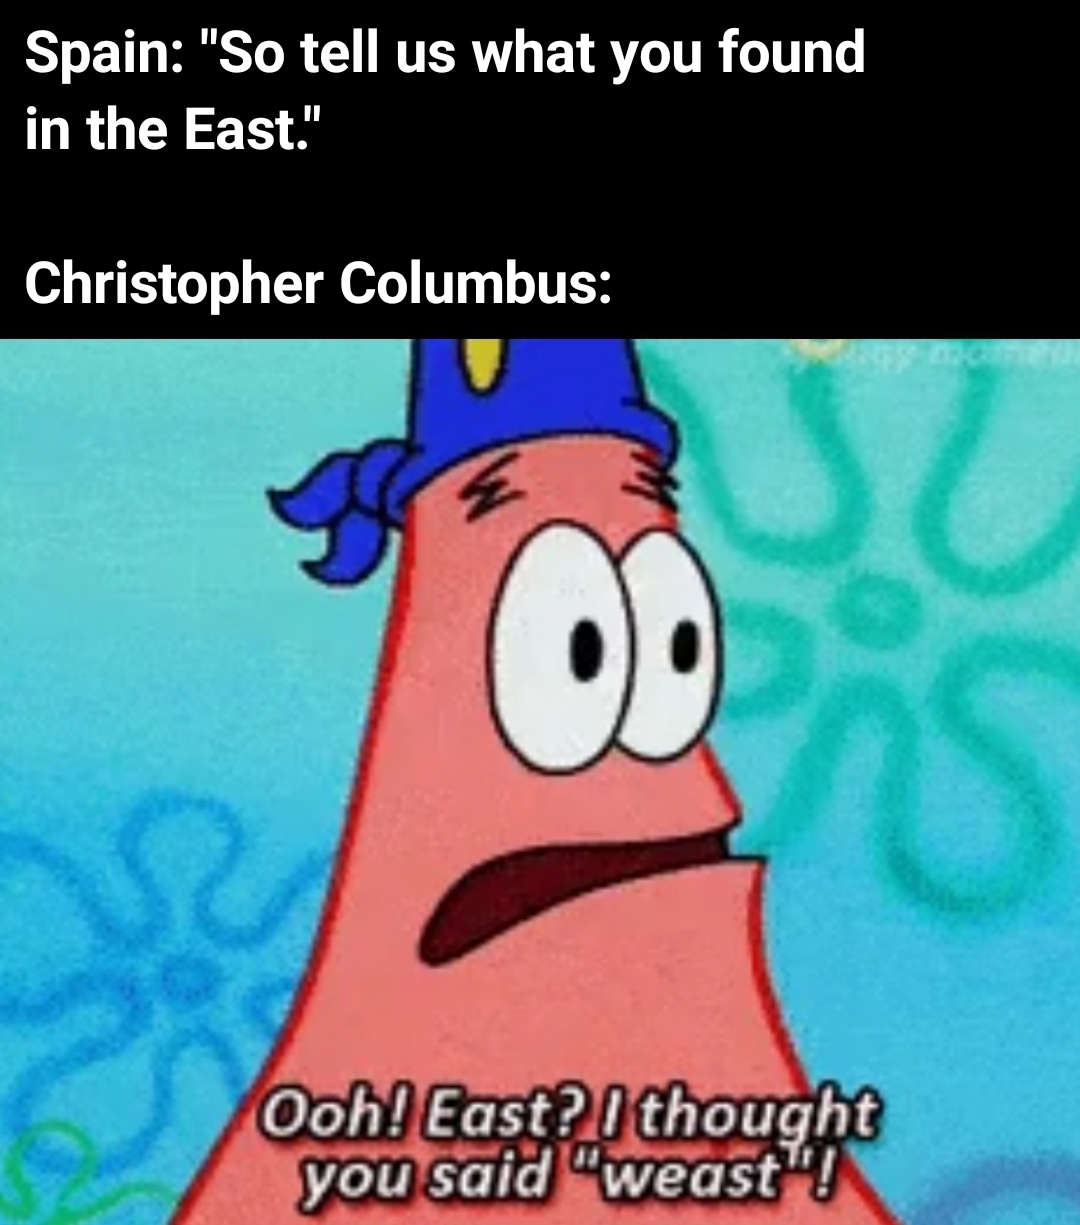 columbus day meme - east i thought you said weast - Spain "So tell us what you found in the East." Christopher Columbus Ooh! East? I thought you said "weast"!